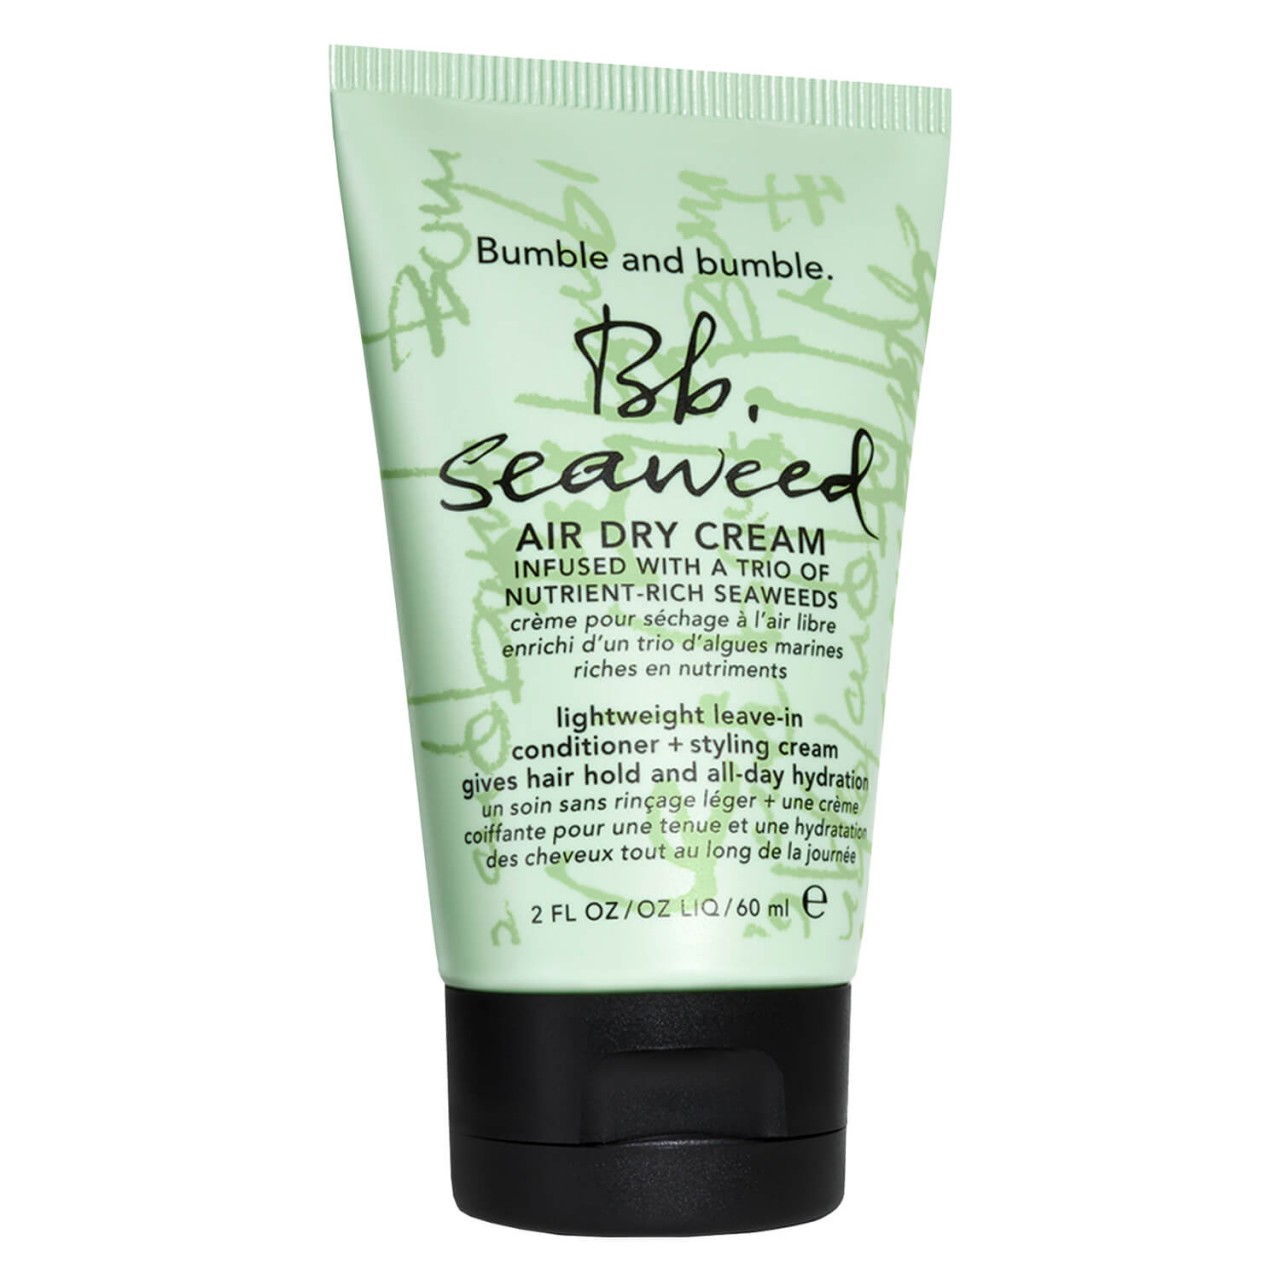 Bb. Seaweed - Air Dry Cream von Bumble and bumble.